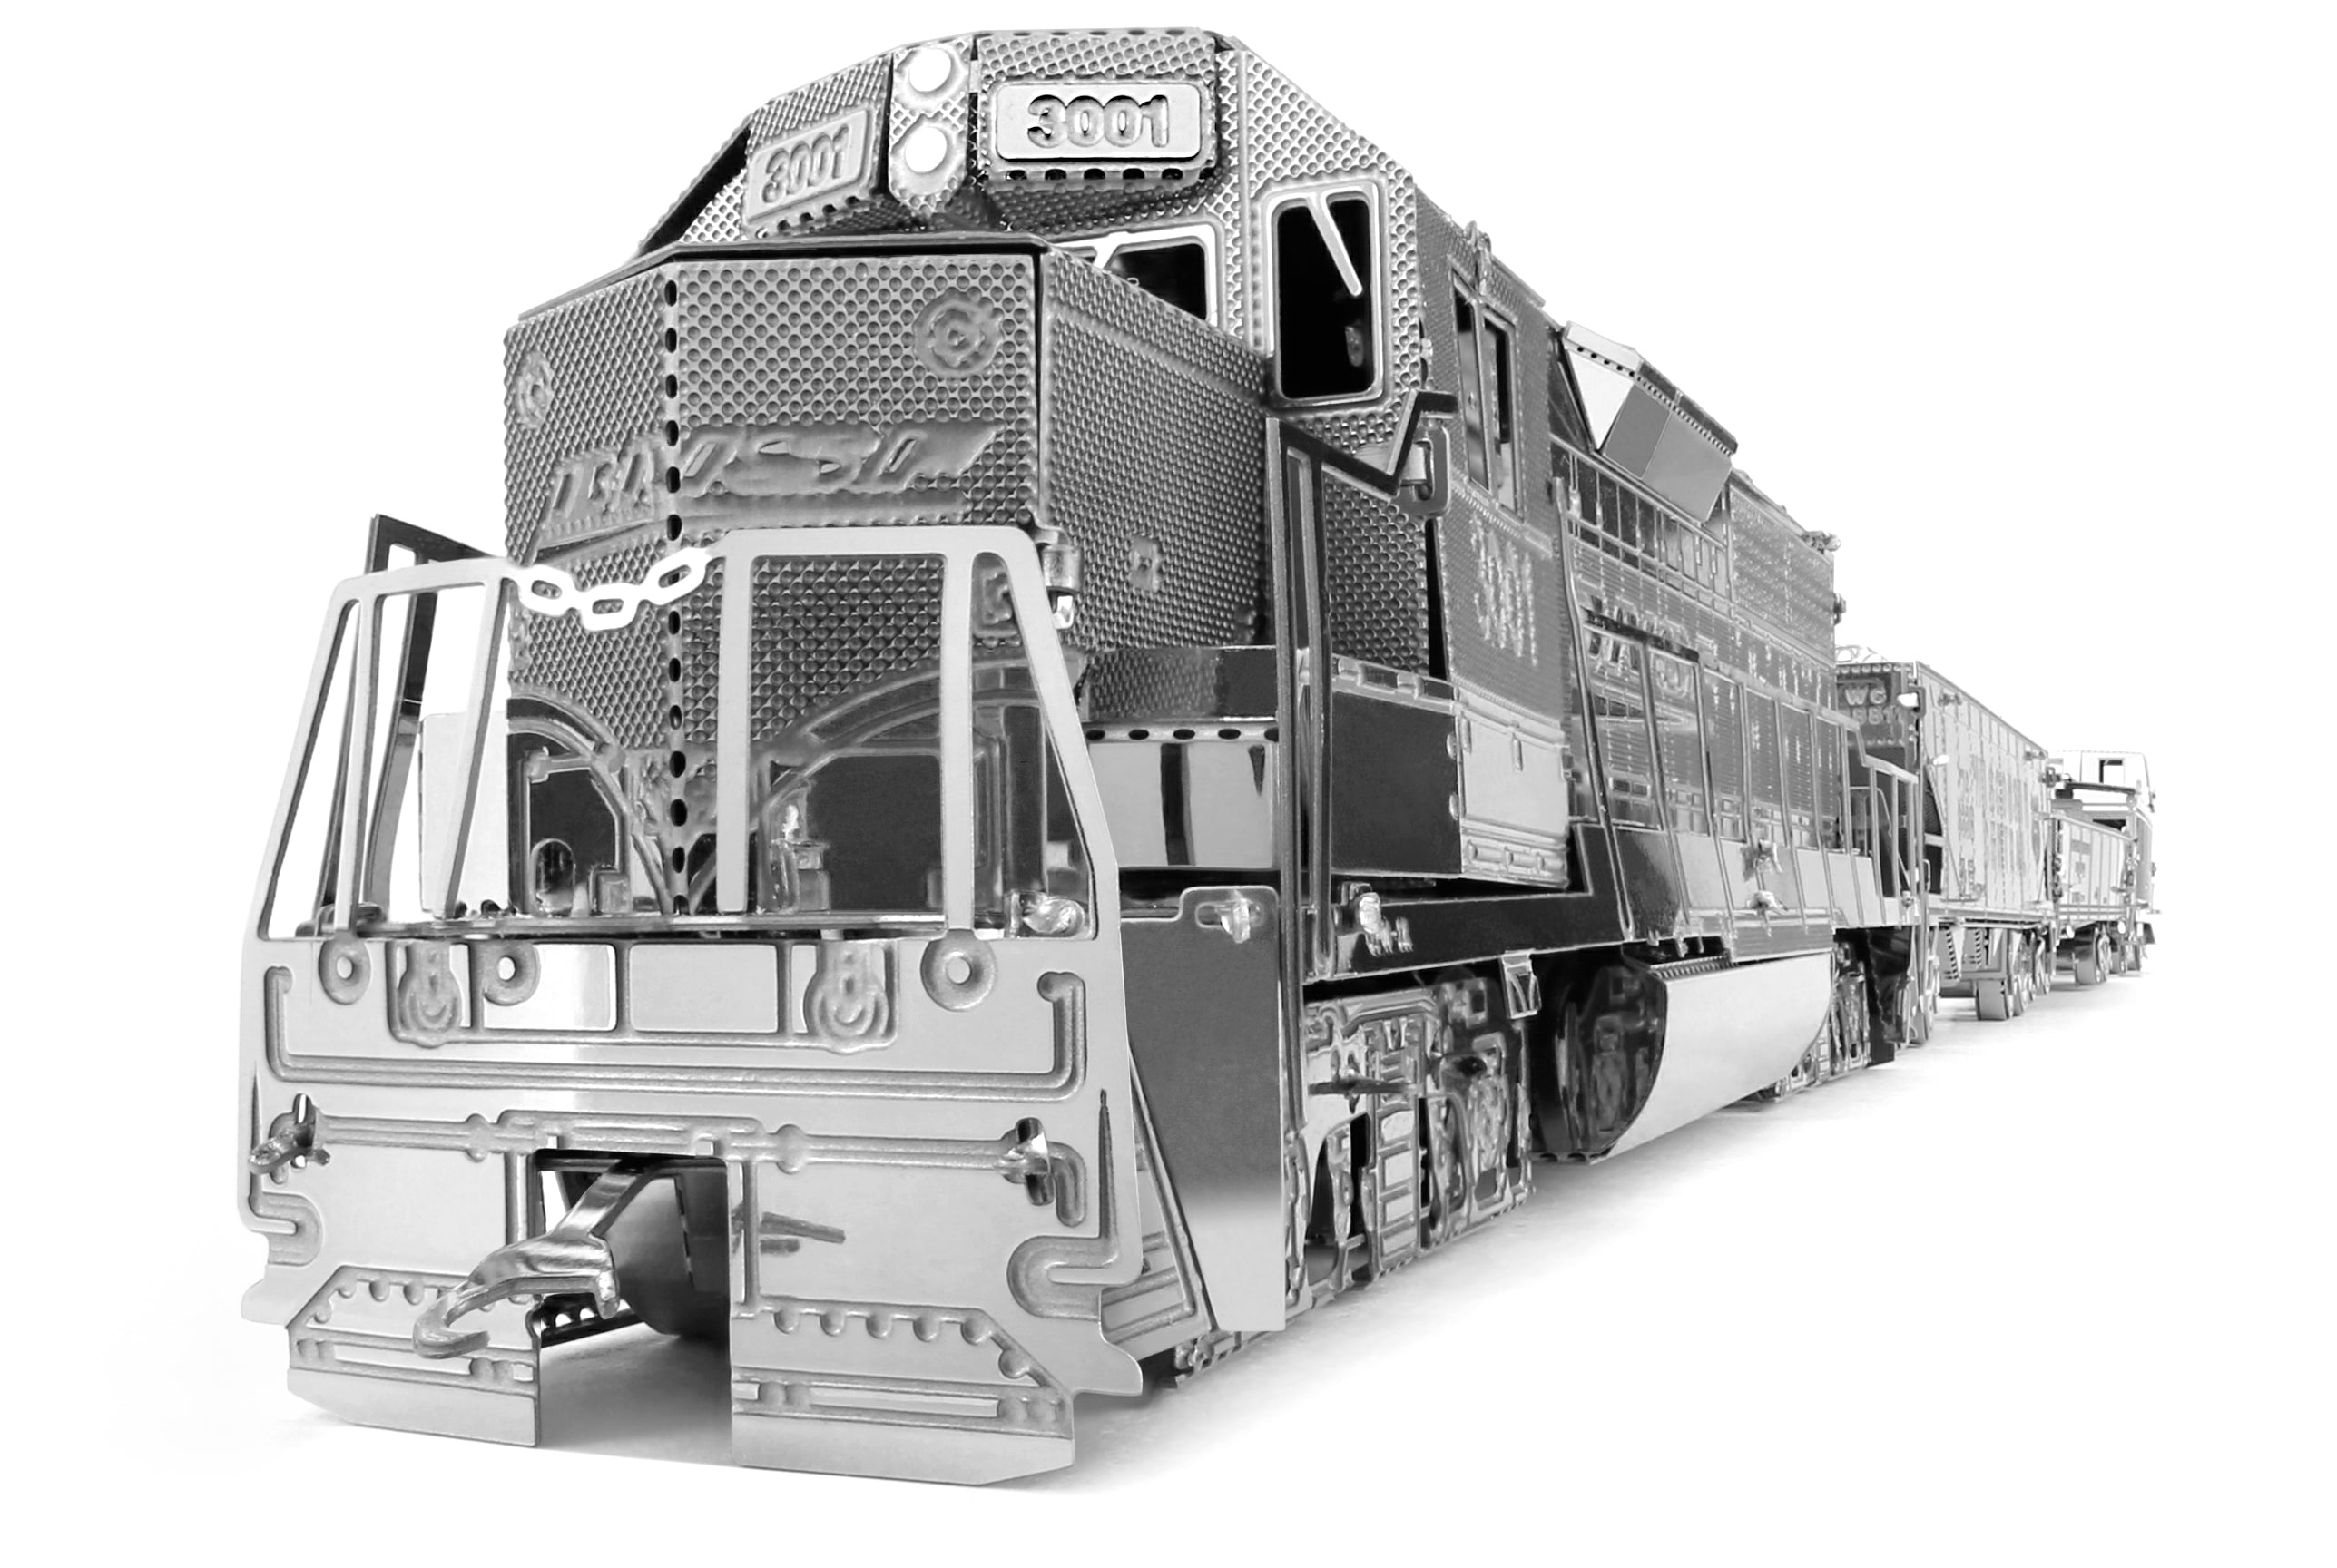 Metal Earth - Freight Train - Engine and 4 Cars    